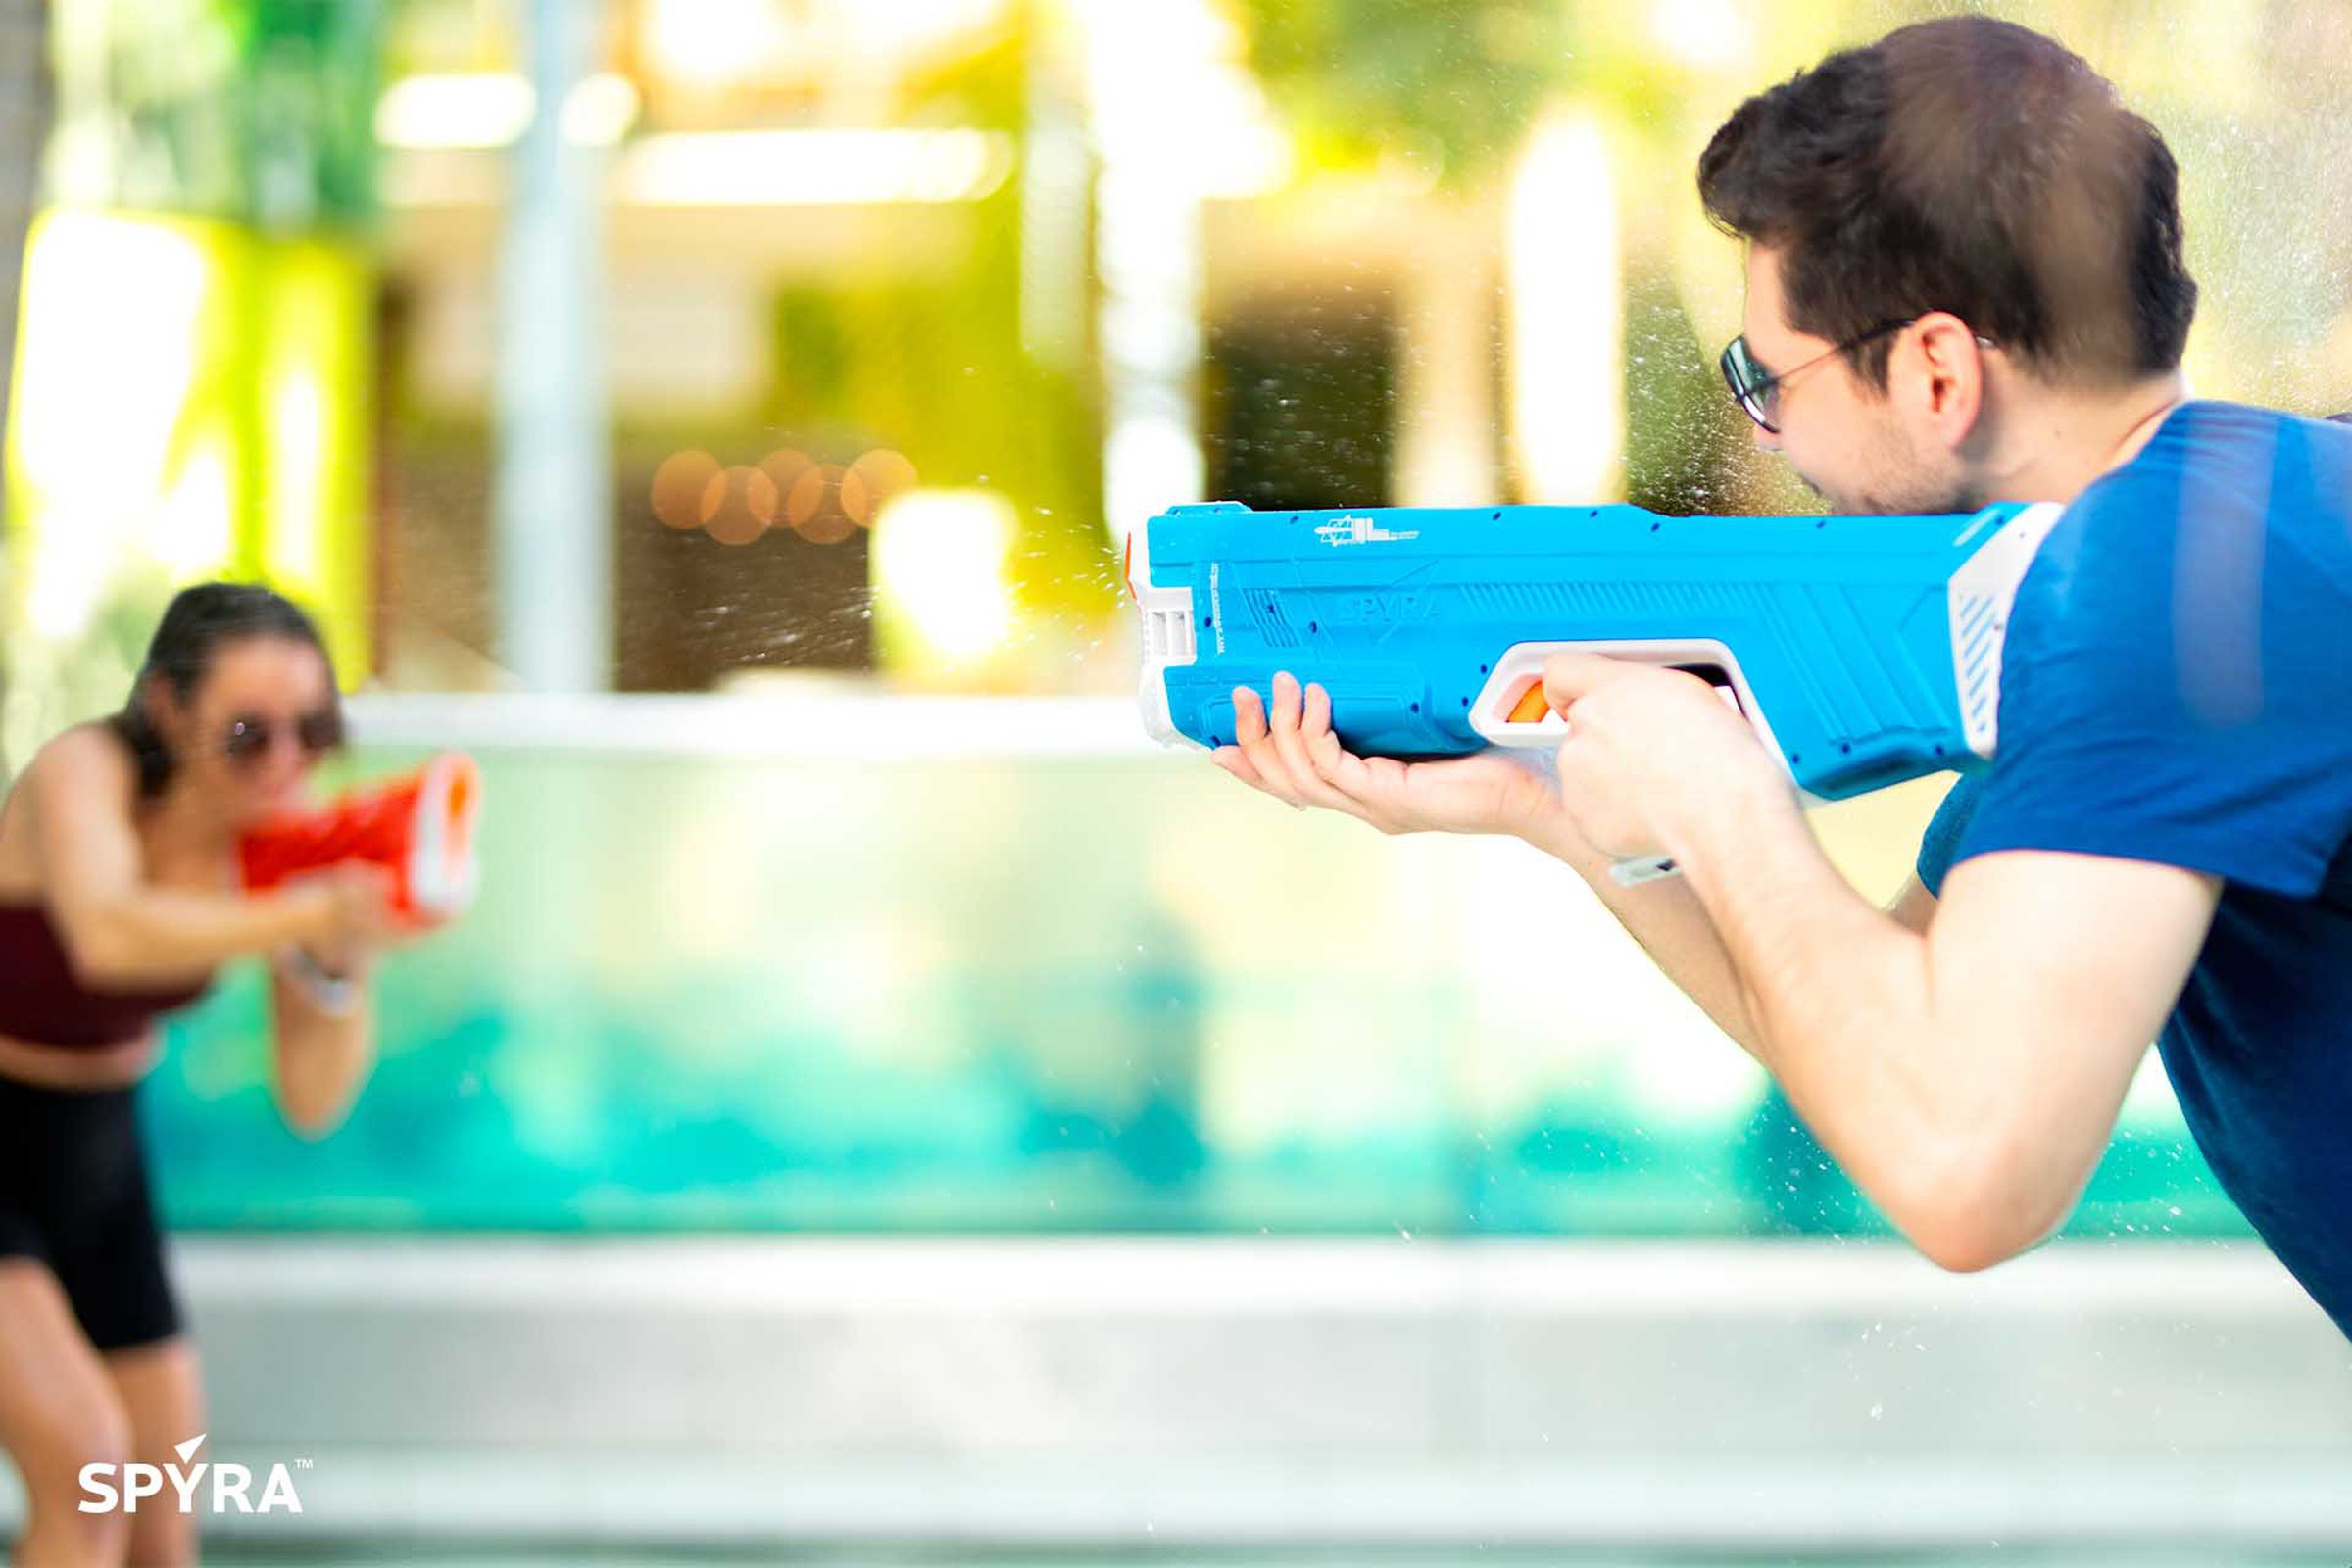 Image of two people fighting with water guns.